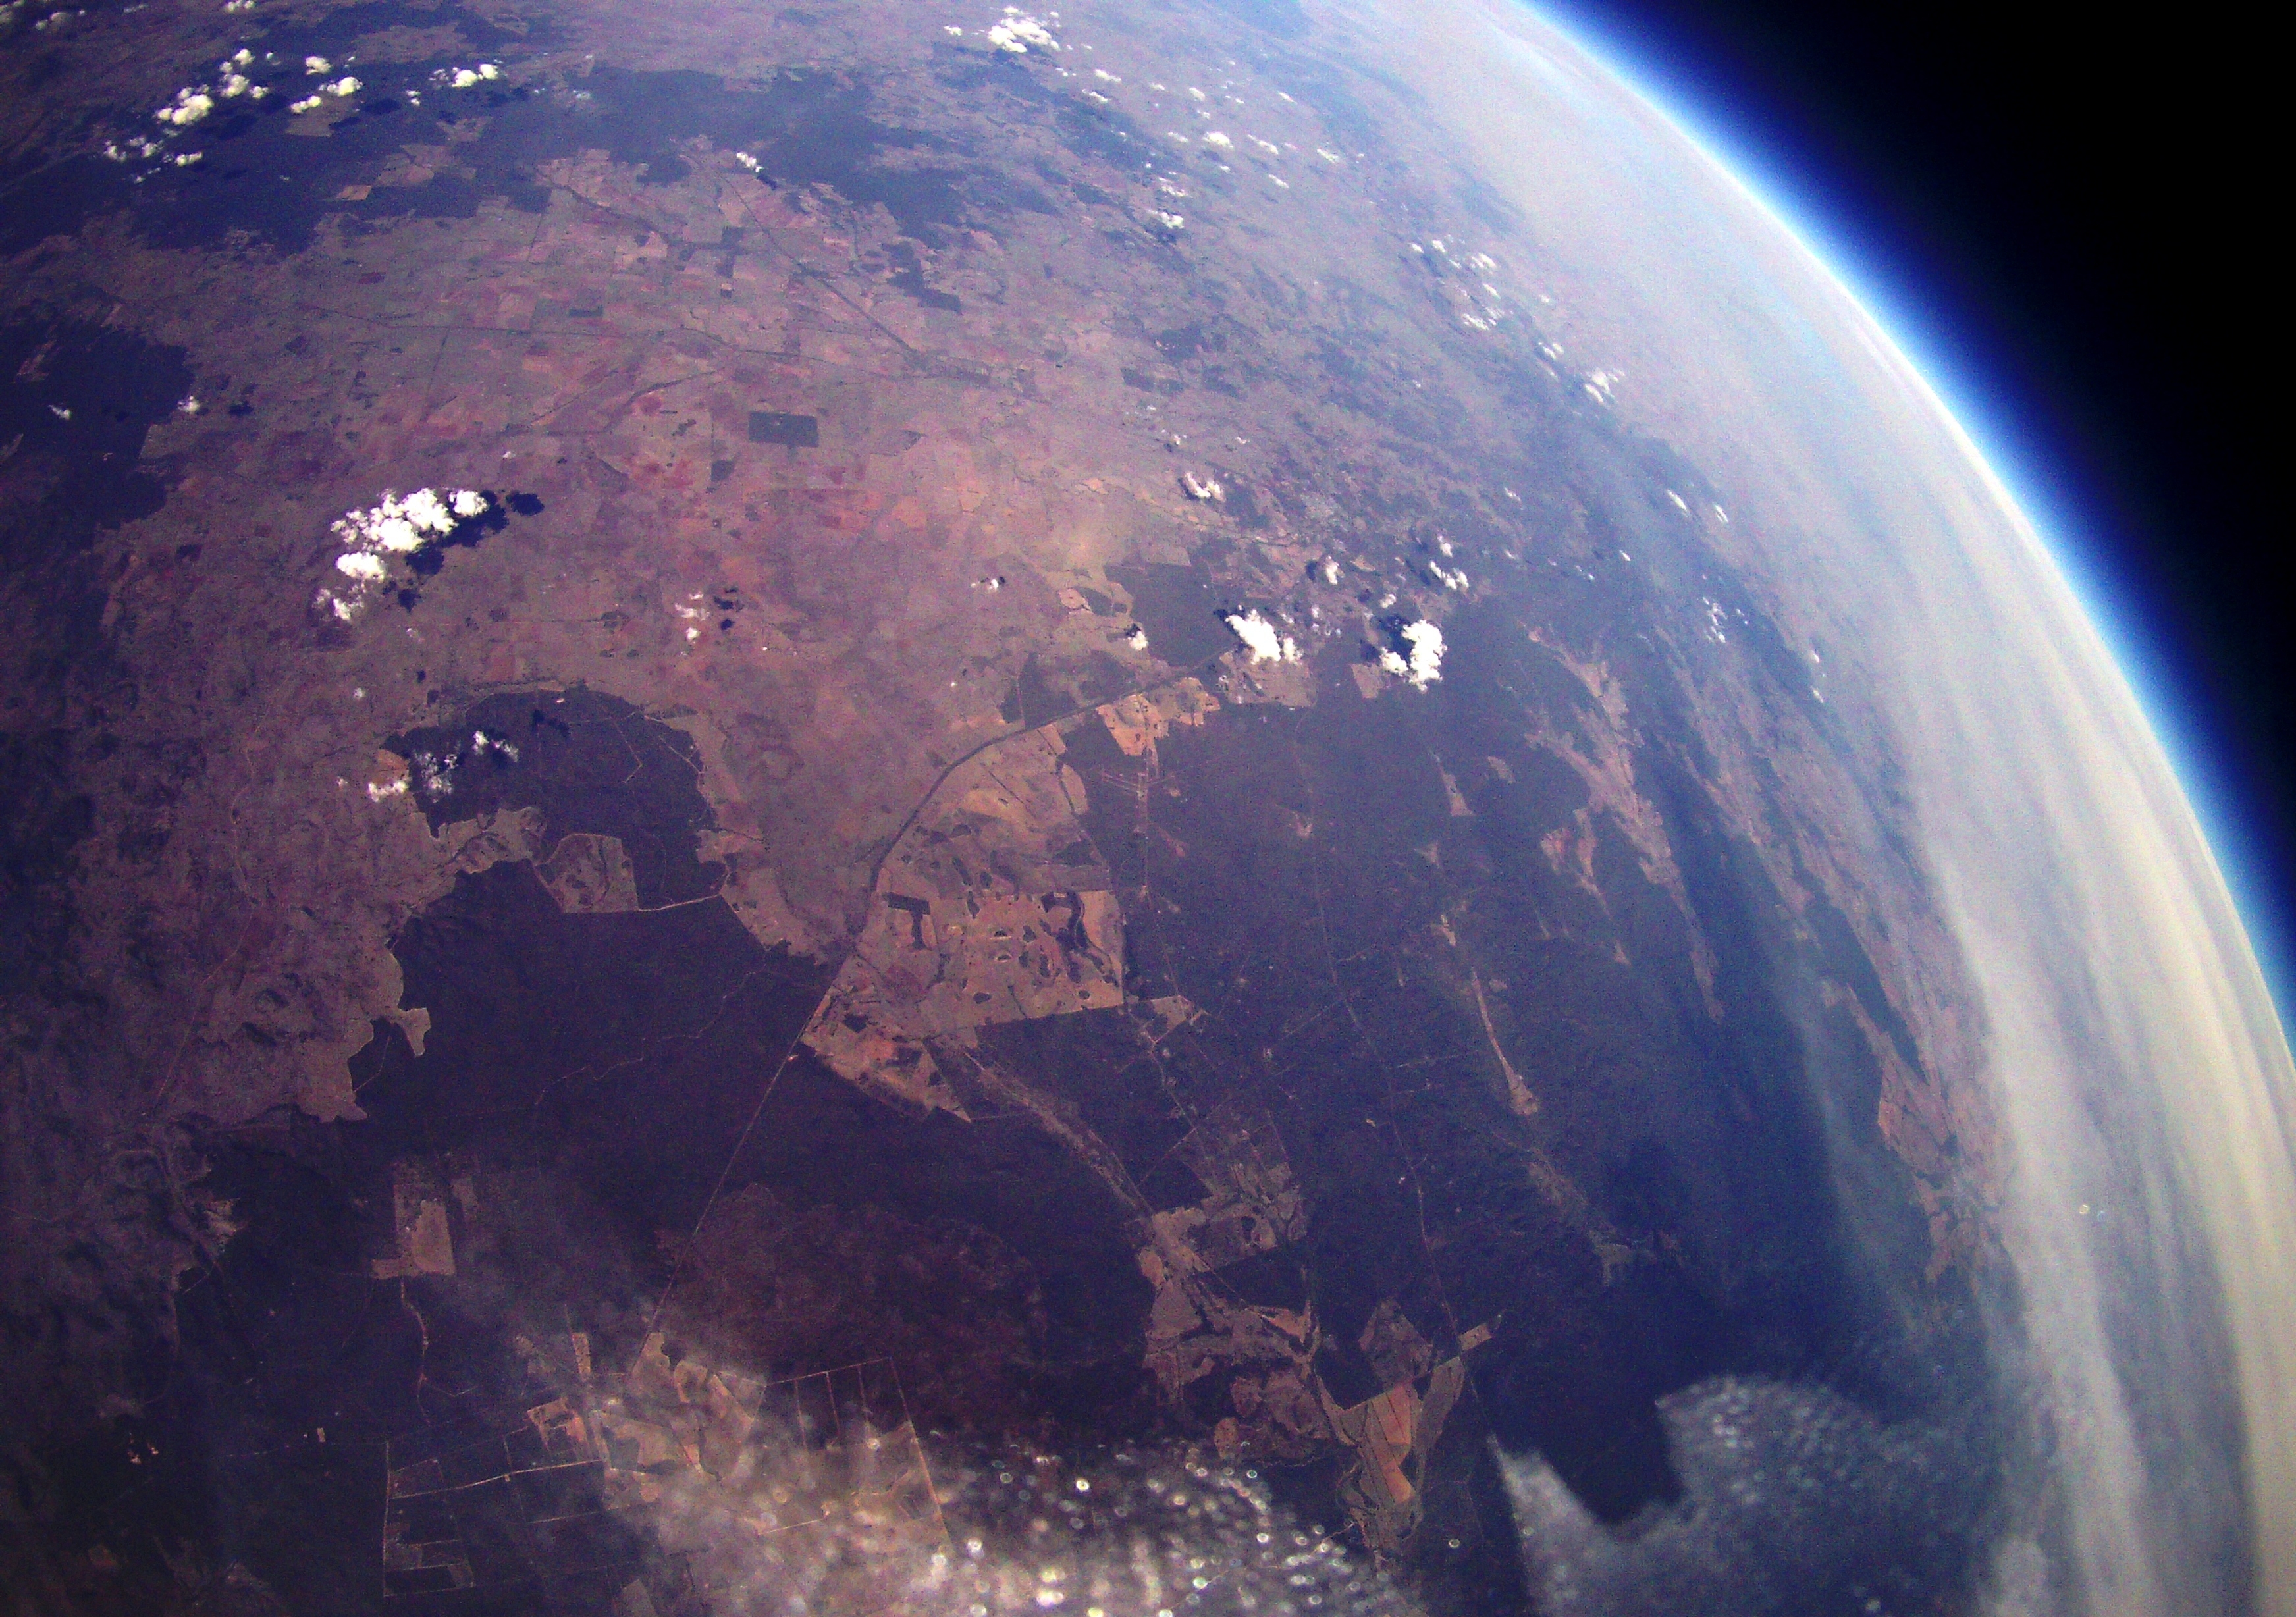 Image from the UNSW high-altitude balloon launched from the Warrambungle National Park.